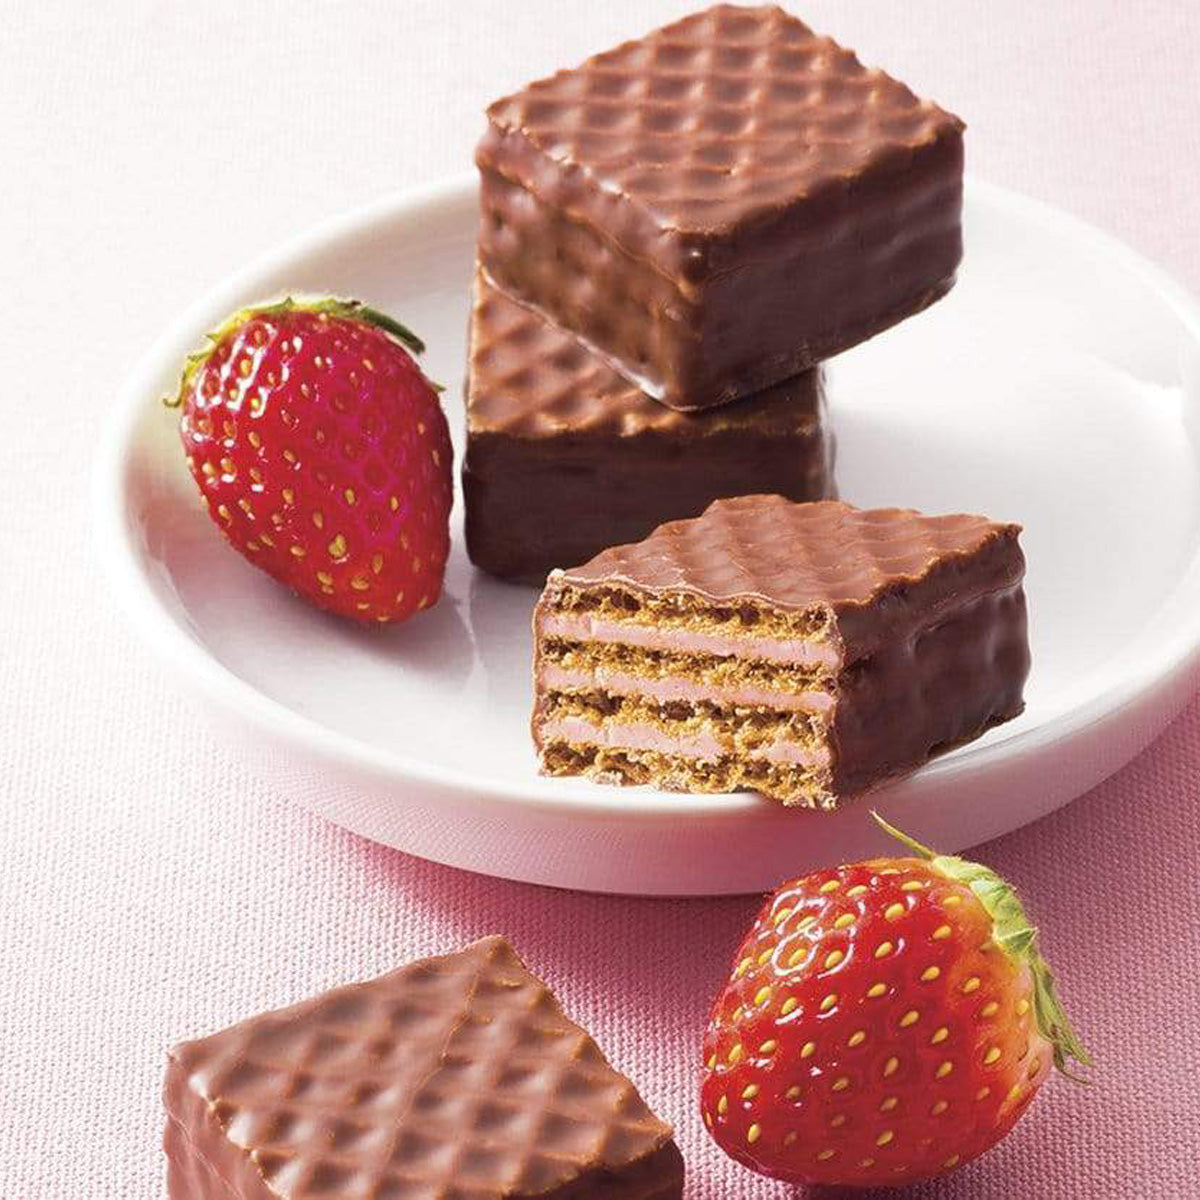 ROYCE' Chocolate - Chocolate Wafers "Strawberry Cream" - Image shows brown chocolate wafers with crisscrossed texture on a round white plate. Accents include red strawberries. Background is in a mix of pink and white colors.